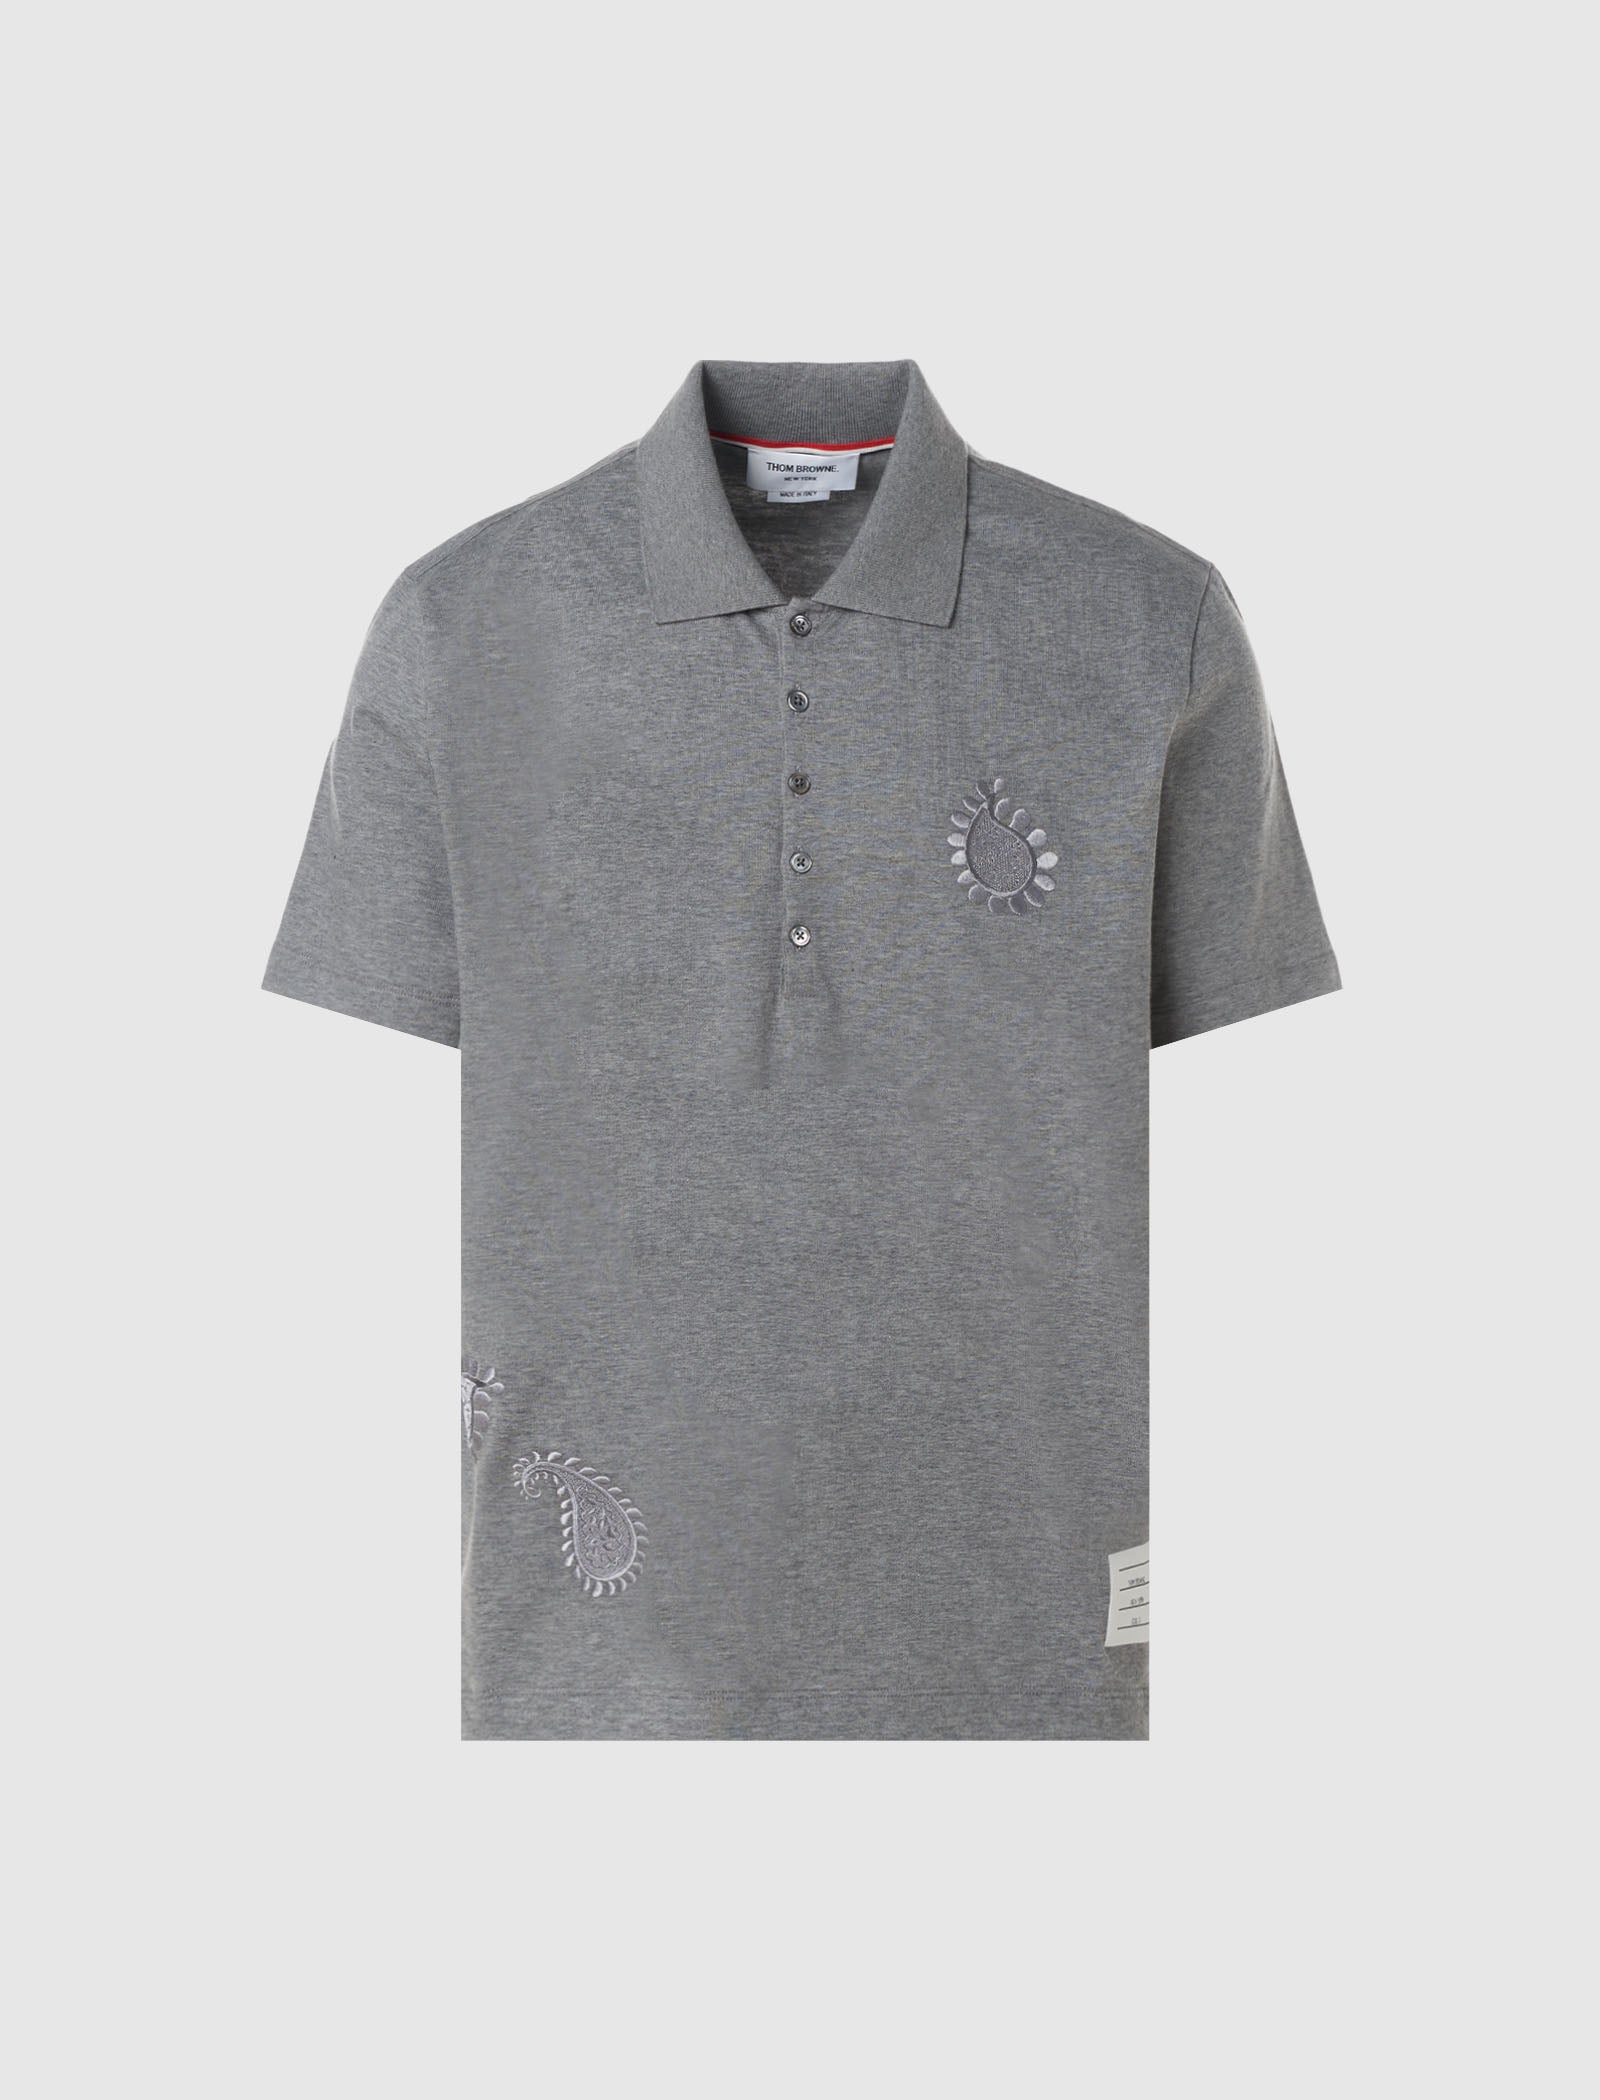 SHORT SLEEVE PAISLEY EMBROIDERED